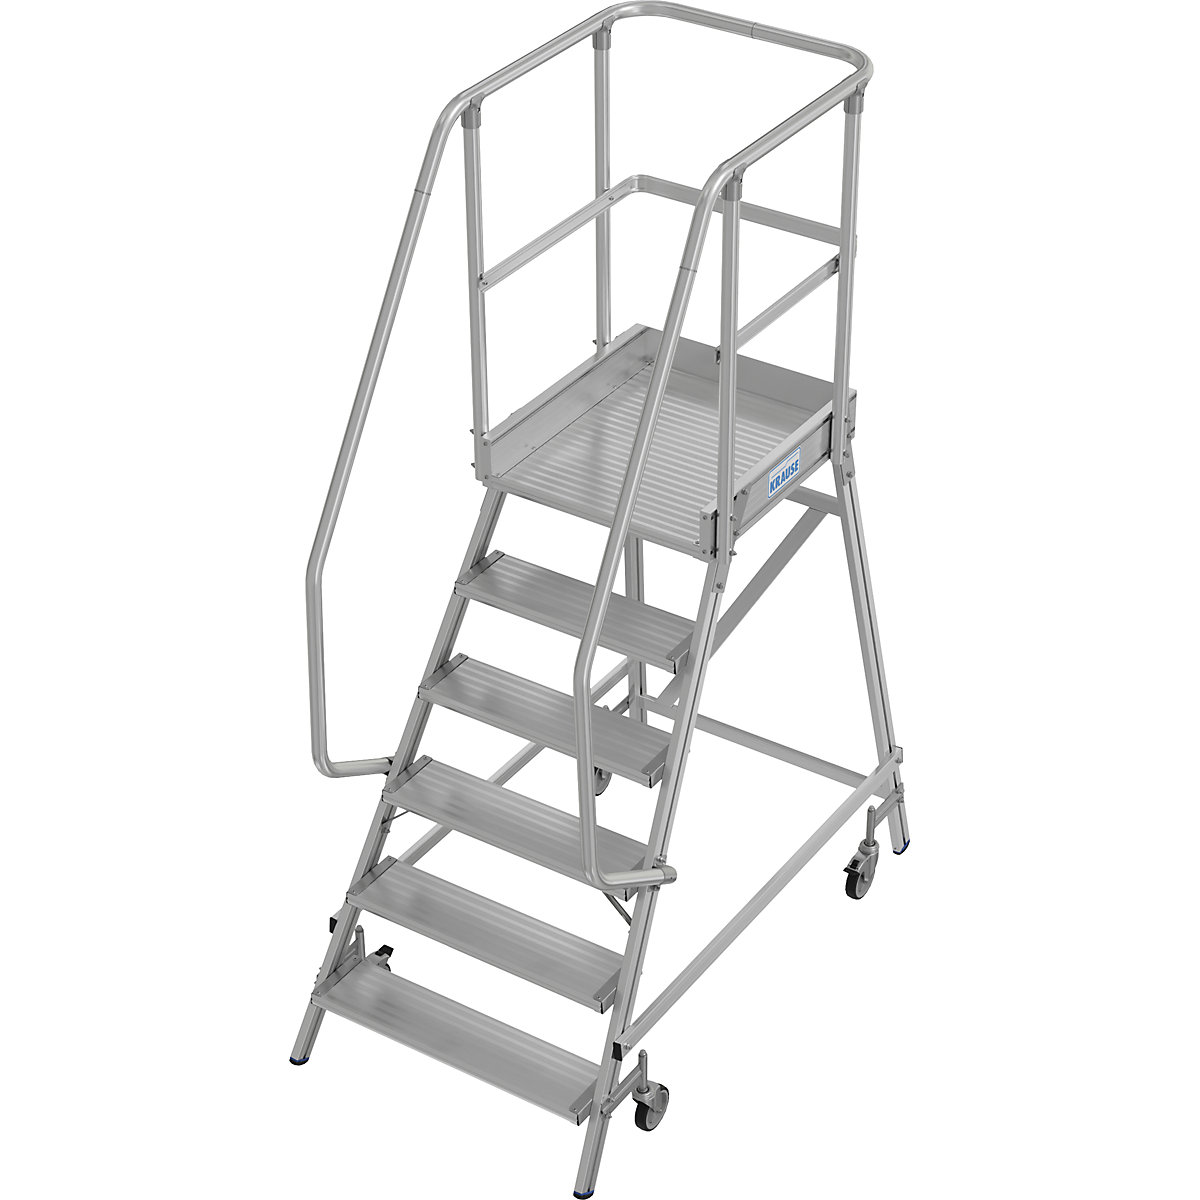 Mobile safety steps – KRAUSE, single sided access, 6 steps-7